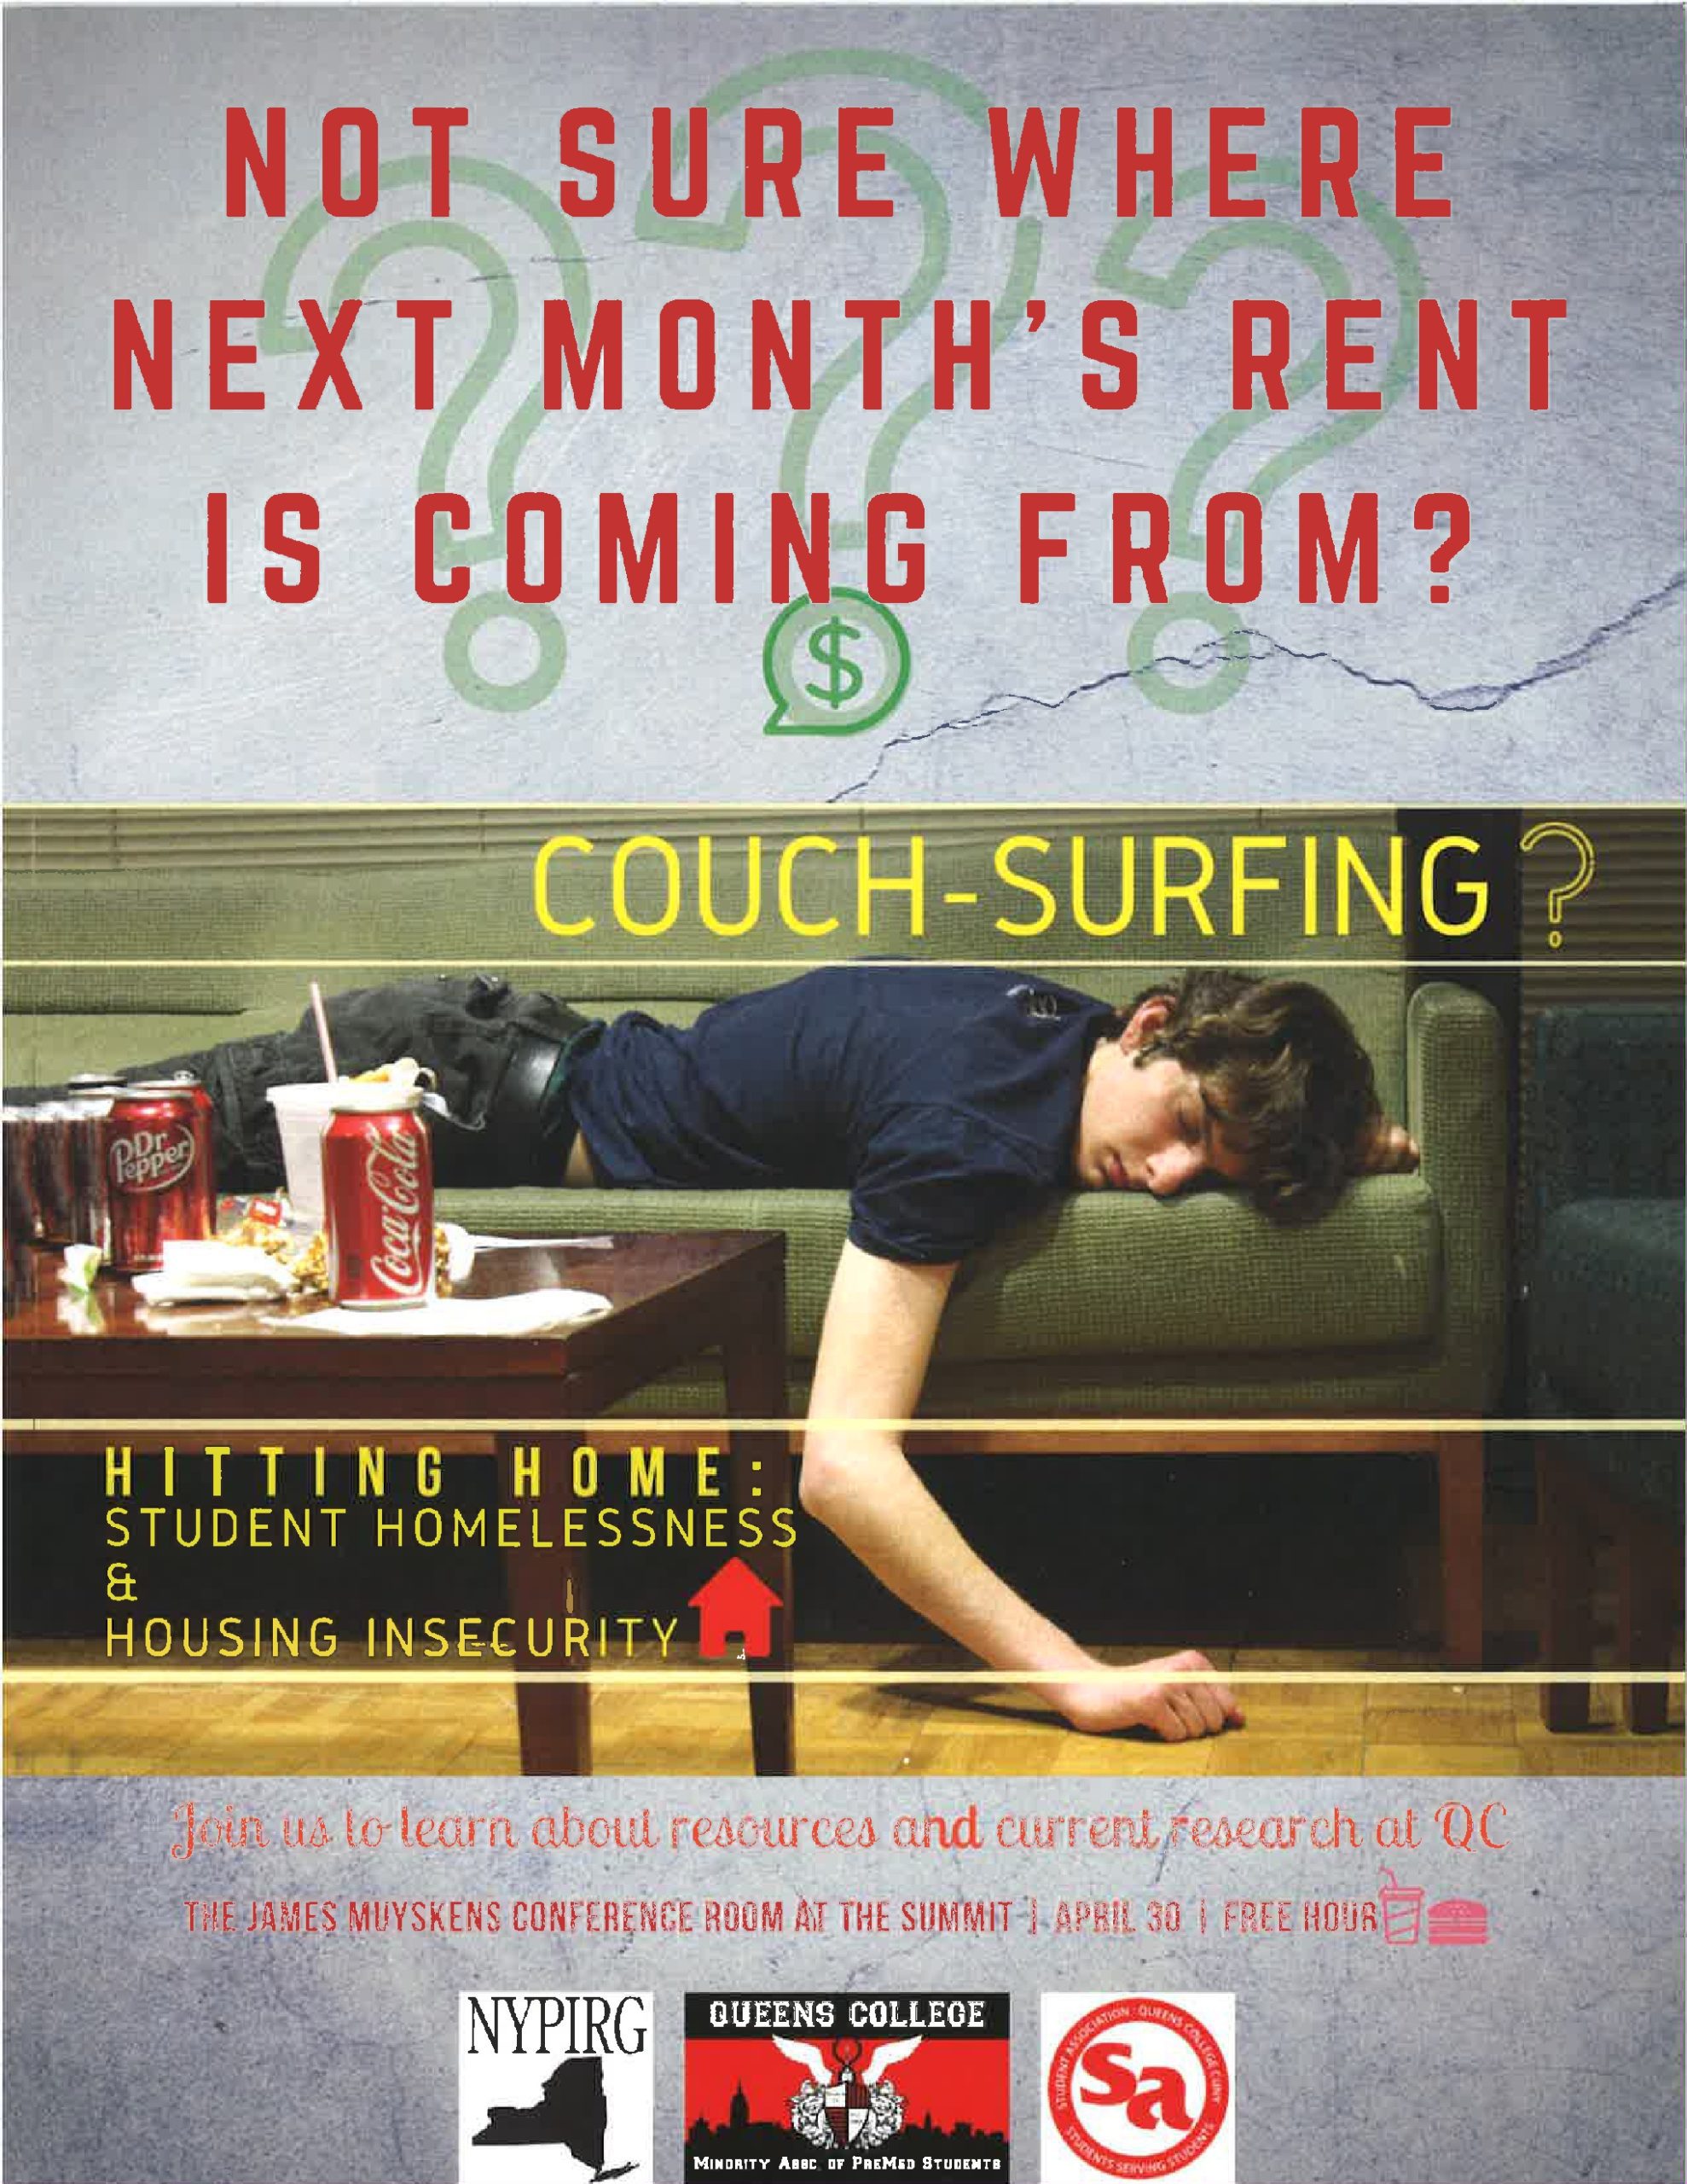 Not sure where next month’s rent is coming from? Flyer